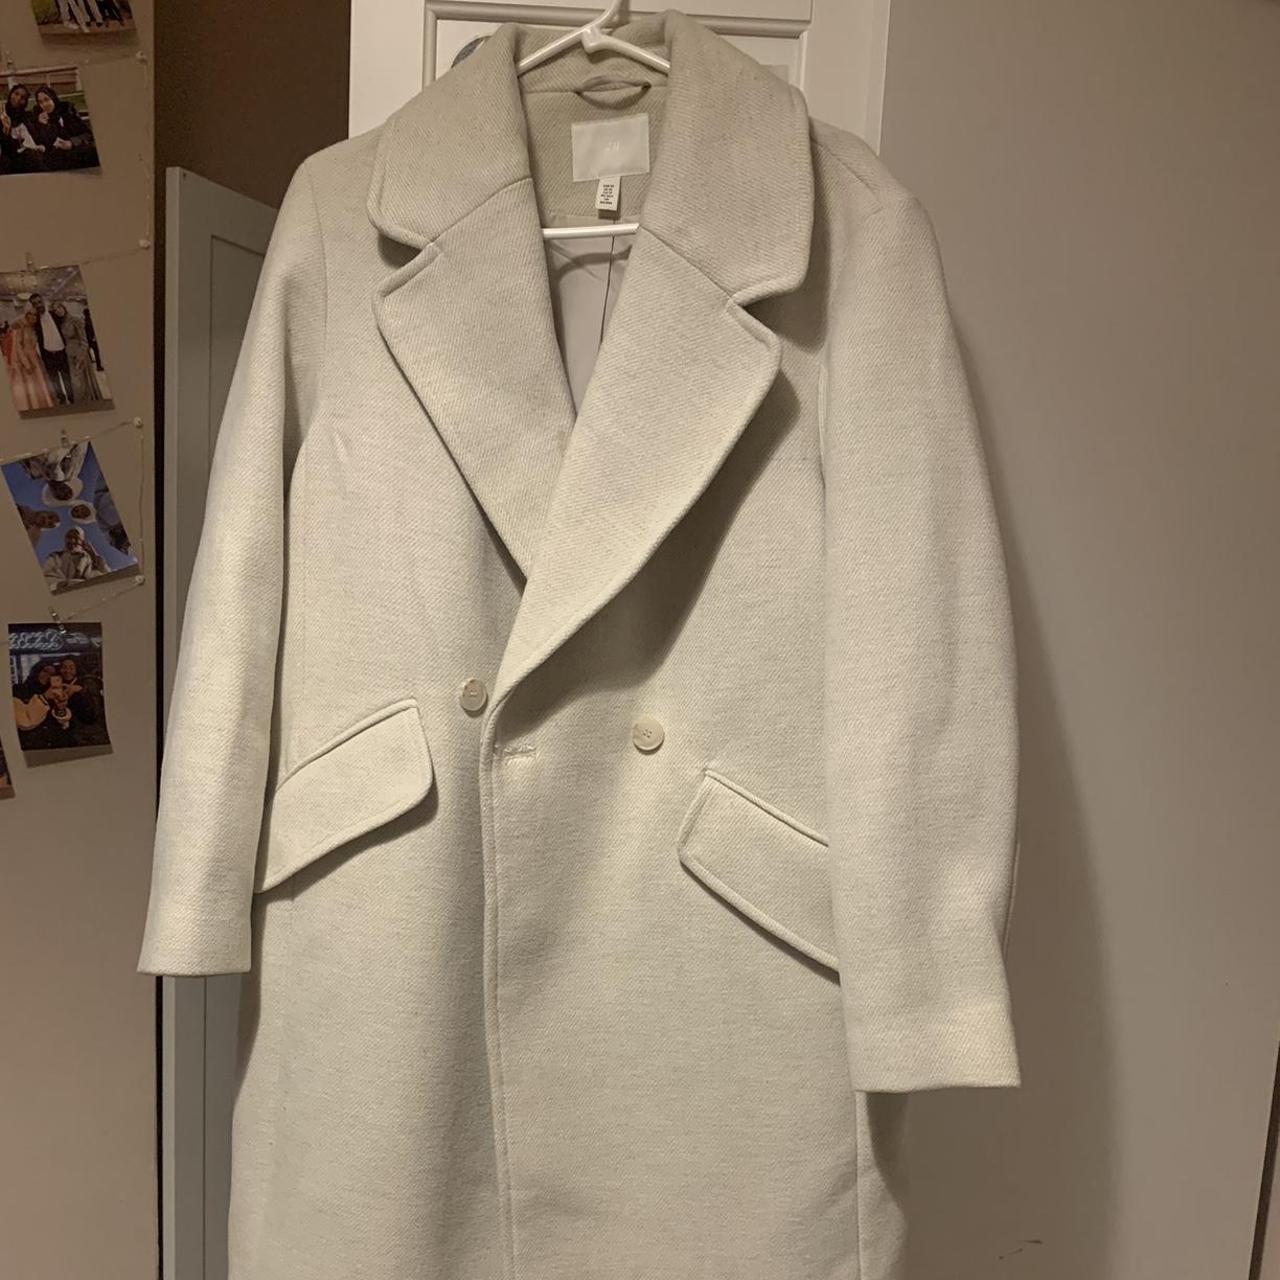 beige wool trench, worn only once - Depop